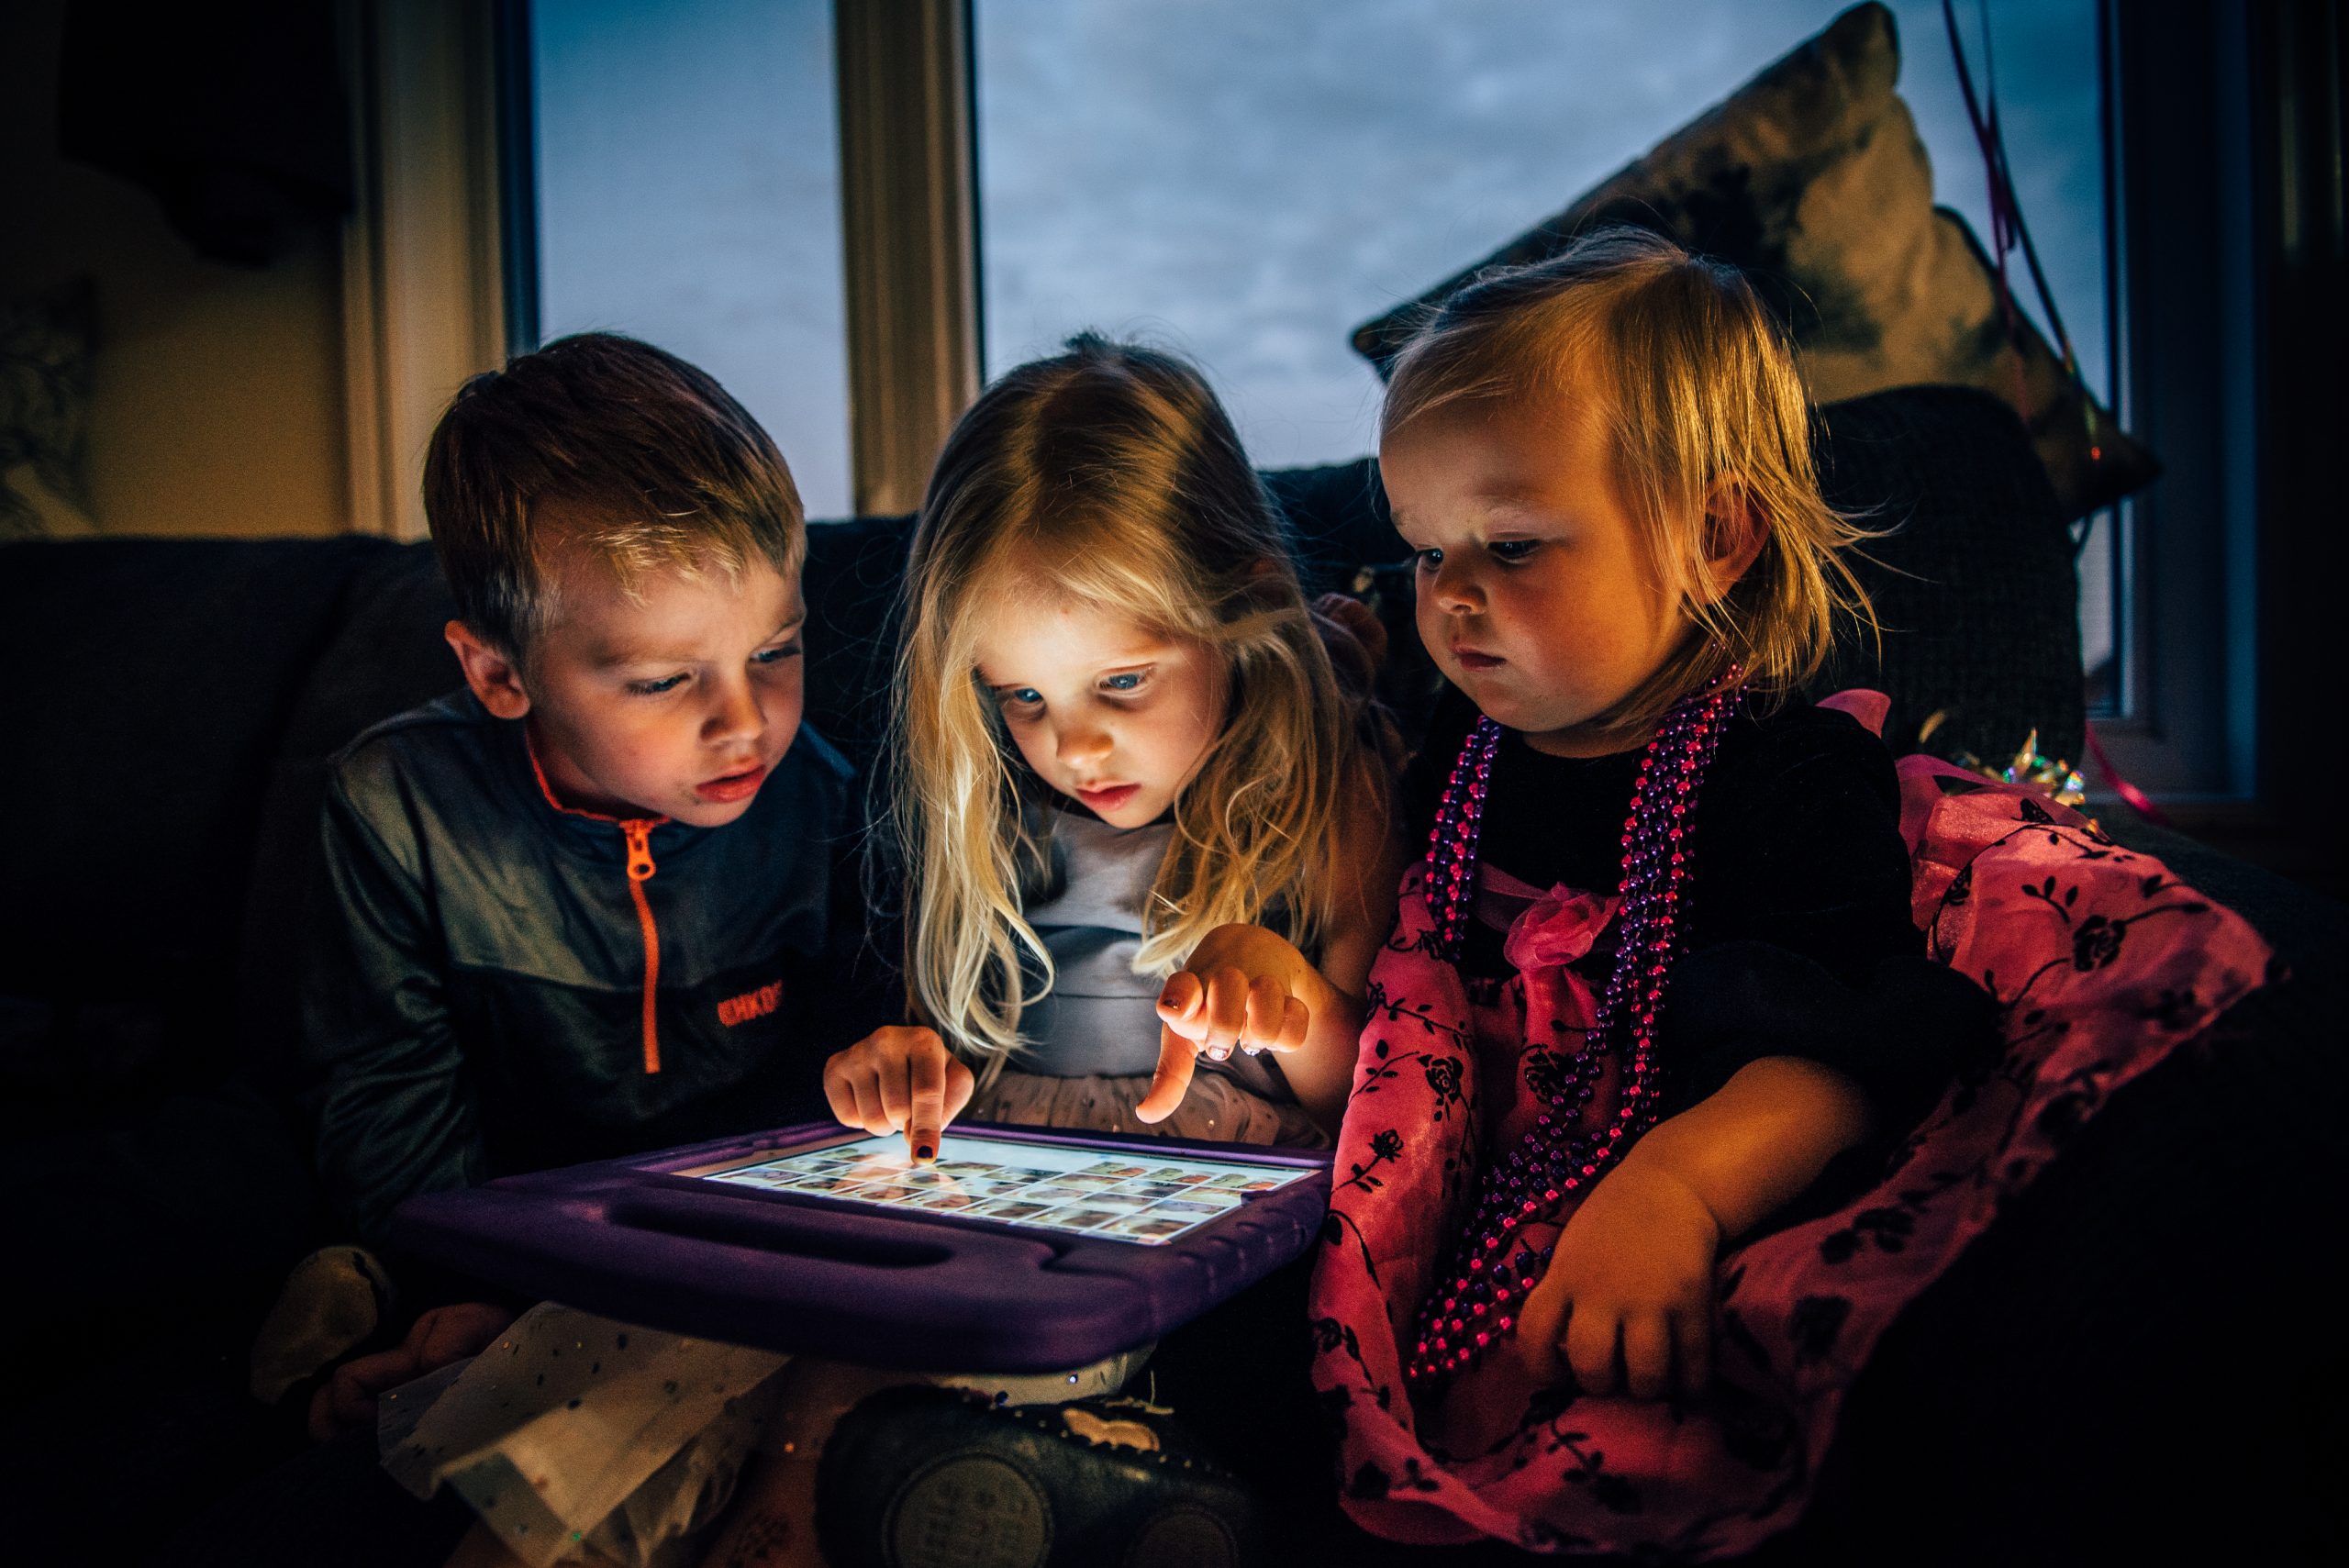 children with a tablet